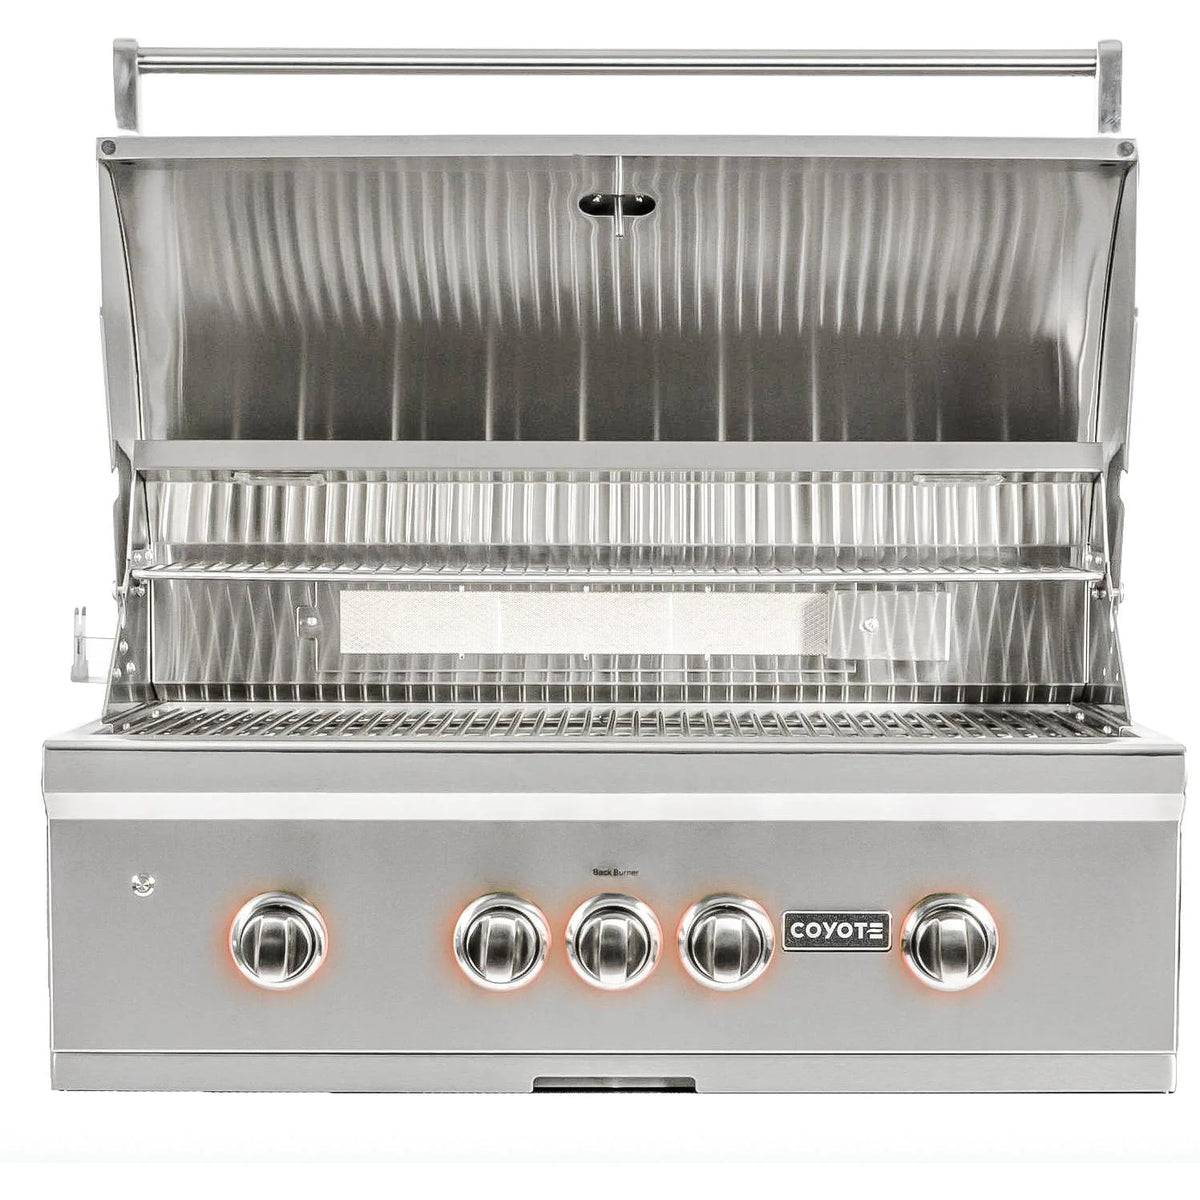 Coyote S-Series 36 Inch Built-In 4-Burner Grill with Rapid sear Infrared Burner Hood Cover Open